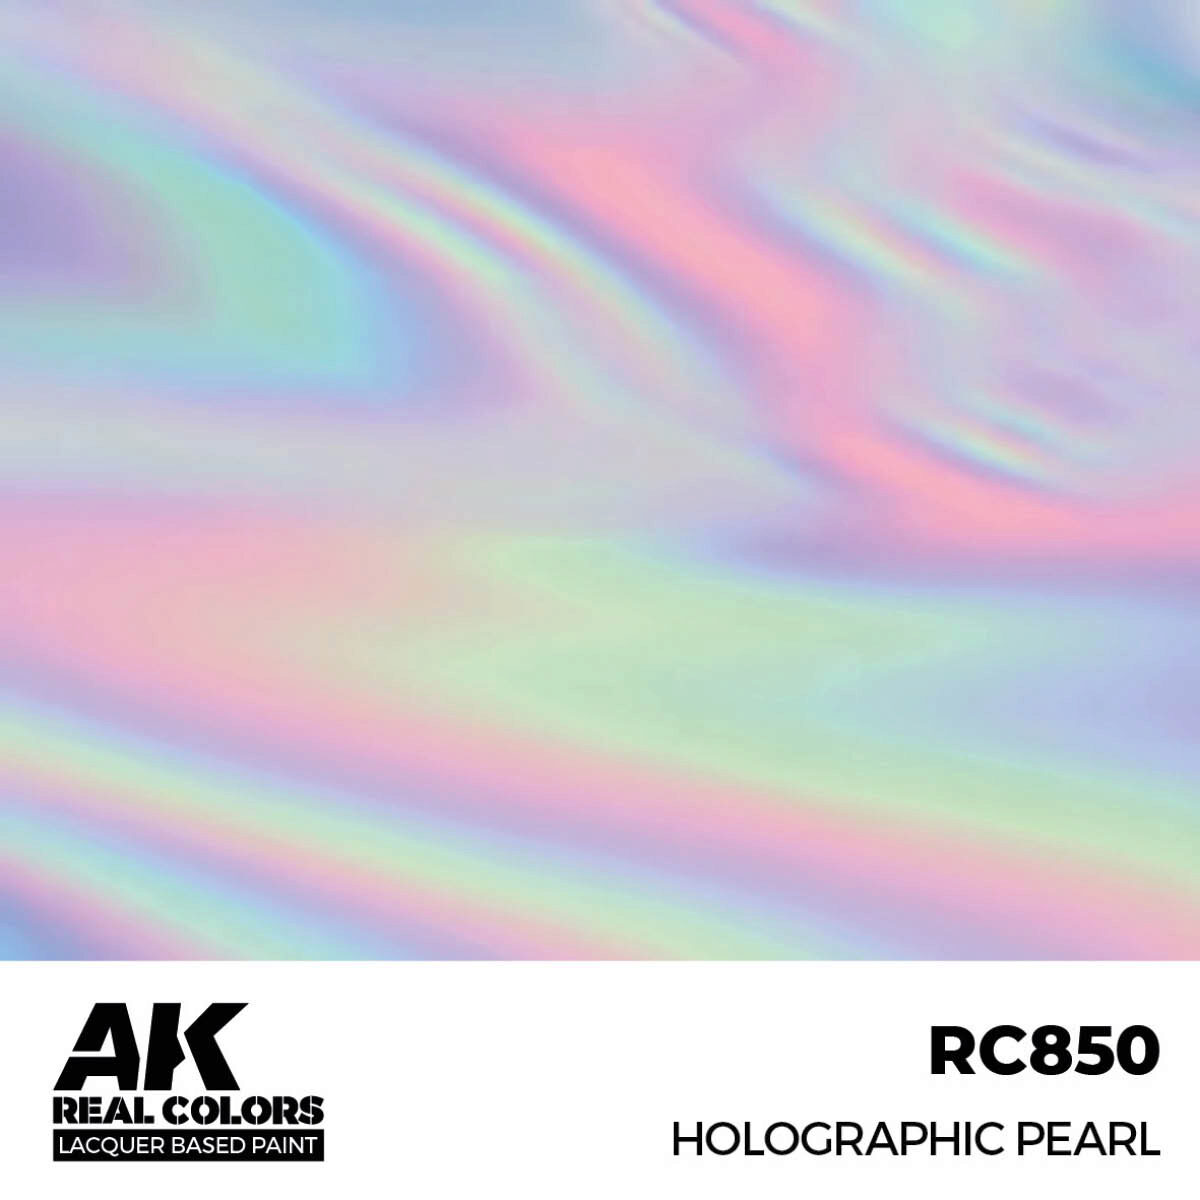 AK RC850 Real Colors Holographic Pearl 17 ml.